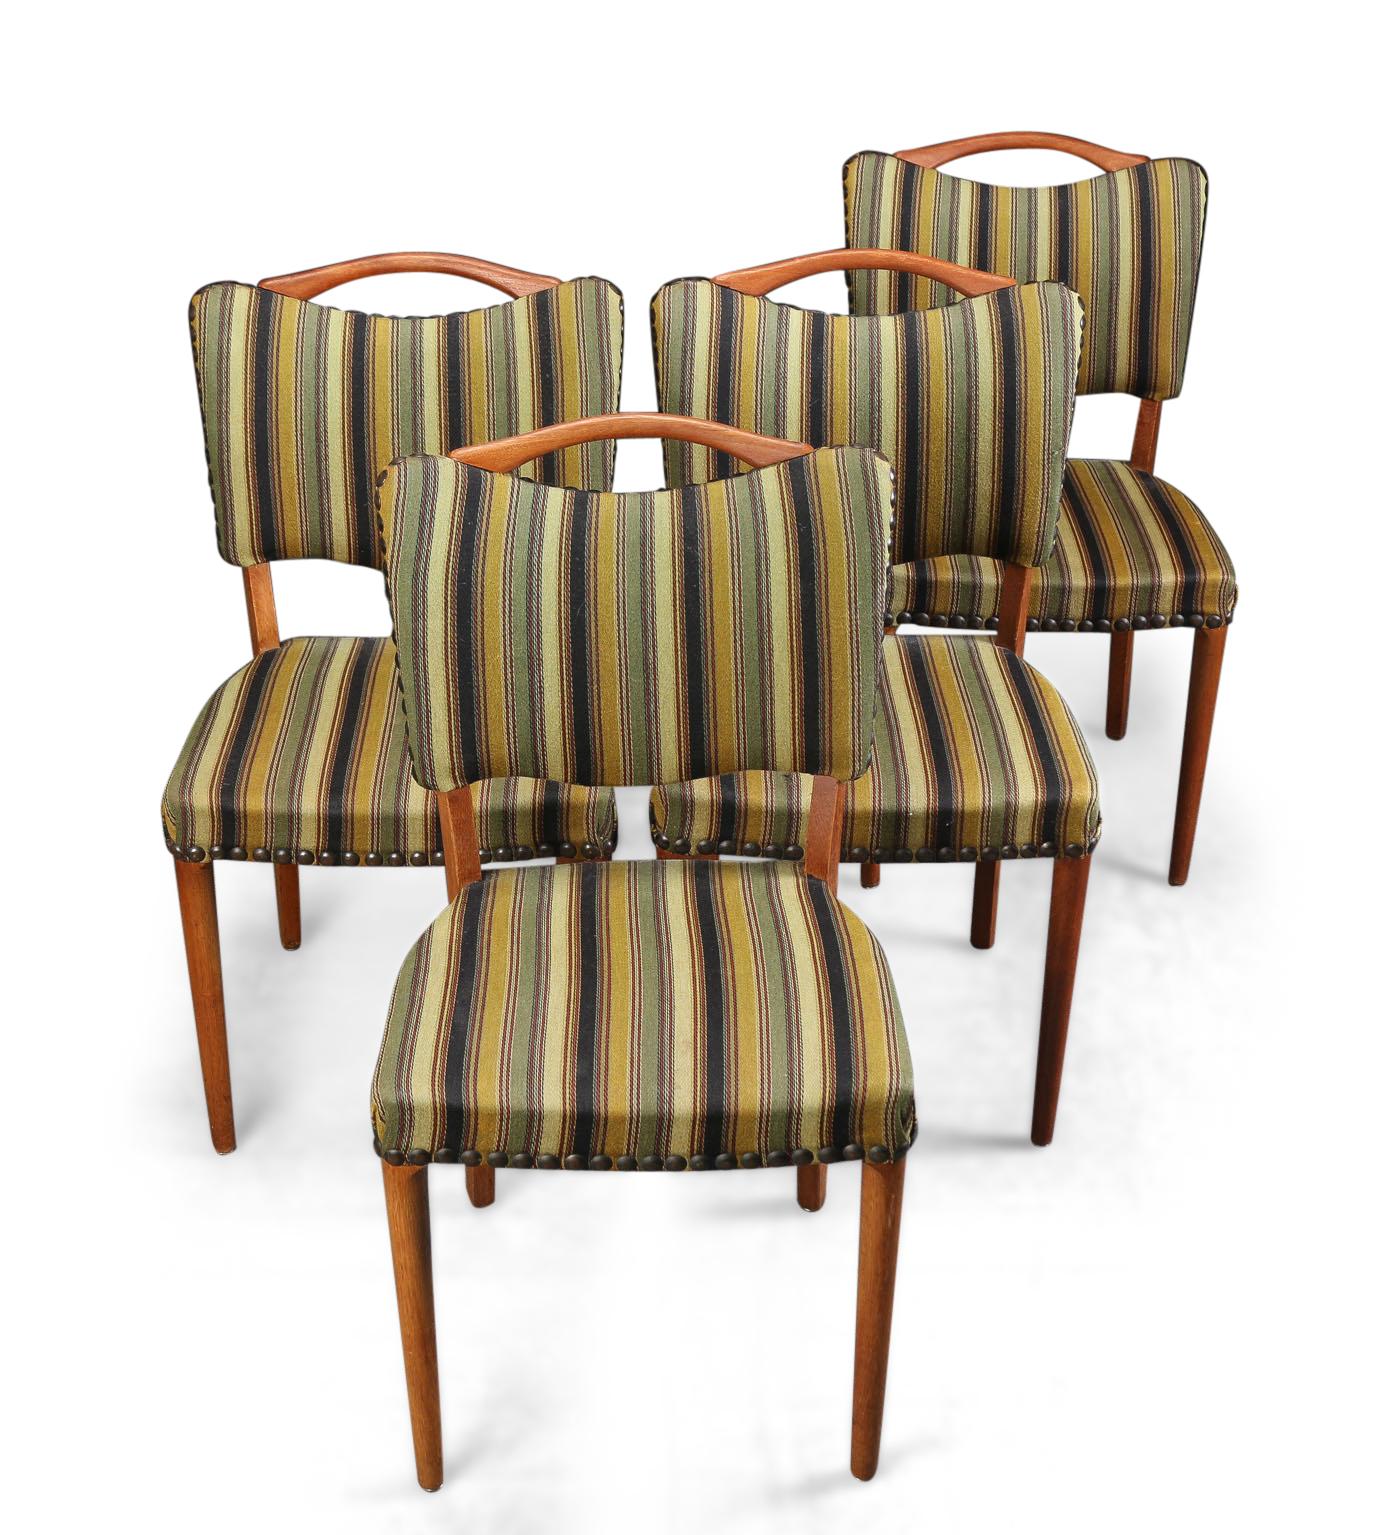 Four dining chairs with oak frame, teak wood handle, seats and backs upholstered with stitched, striped wool.
SH 45 cm. Beginning of the 1950s.
Normal wear due to age.